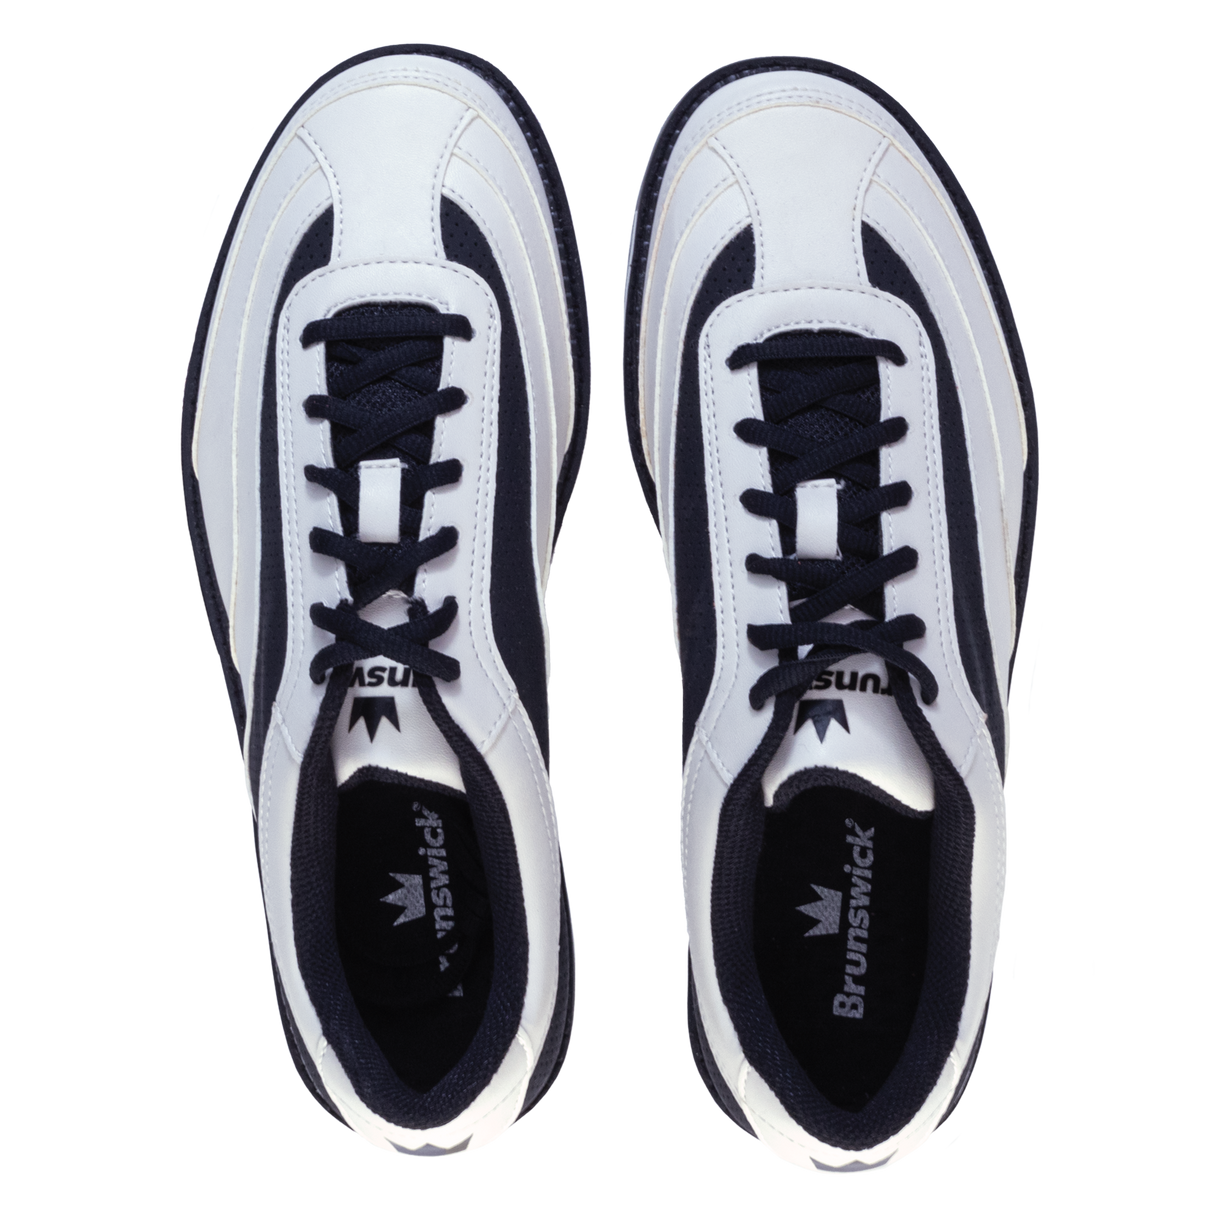 Brunswick Rampage White/Black Bowling Shoes * Synthetic uppers * Customizable Slide Sole technology * Rubber push away * Fixed Heel * Includes: #6 and #8 Slide Soles